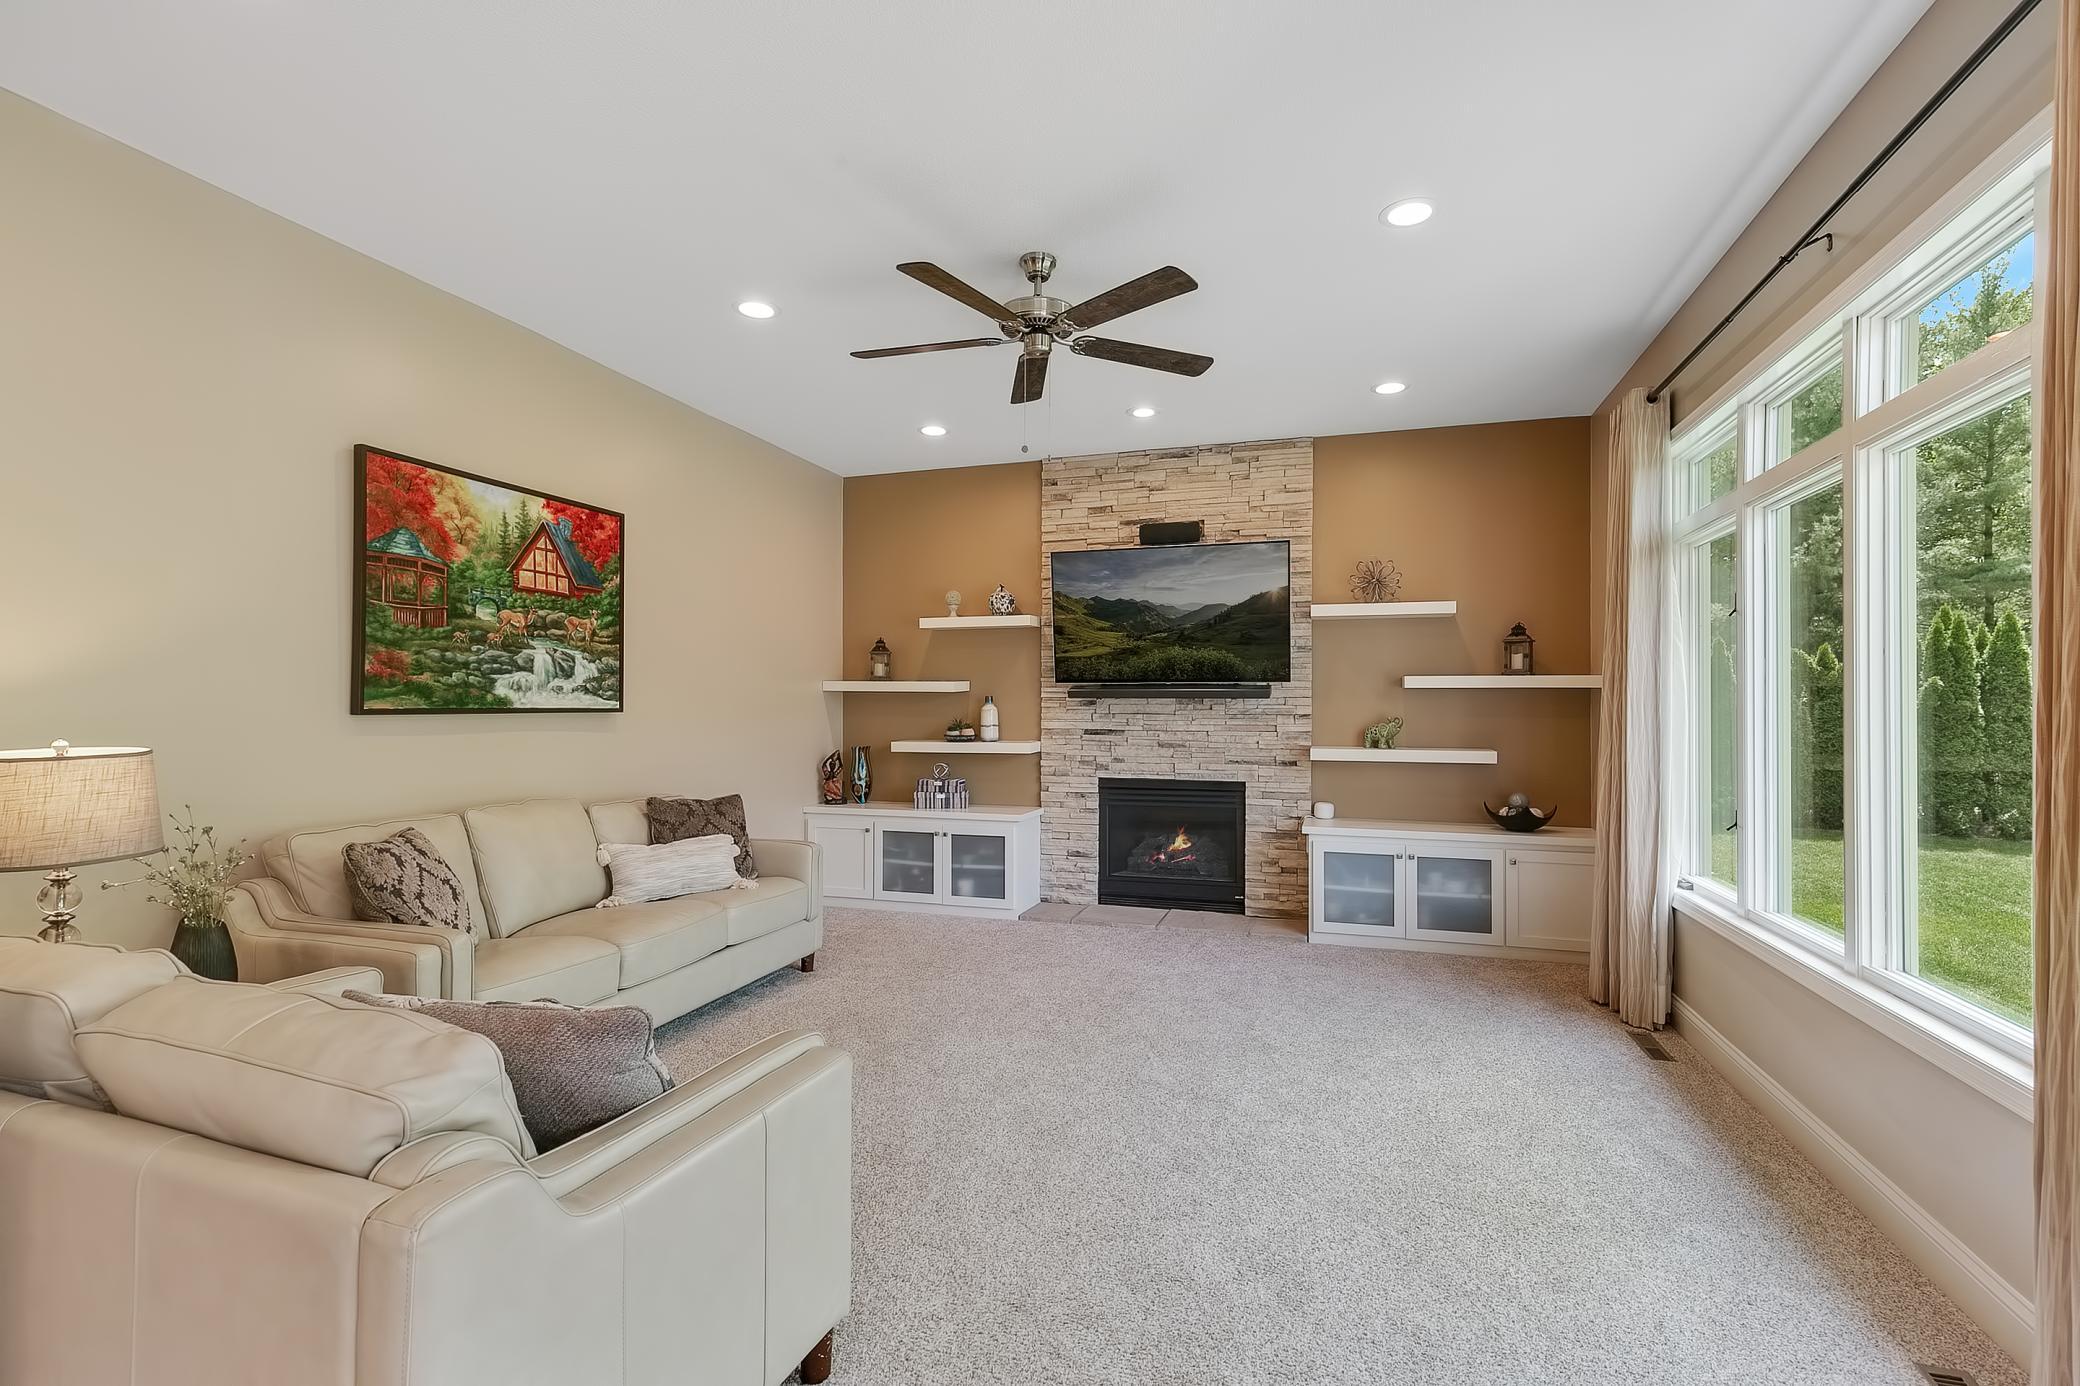 Wonderful main floor family room with gas fireplace and built in cabinets and floating shelving